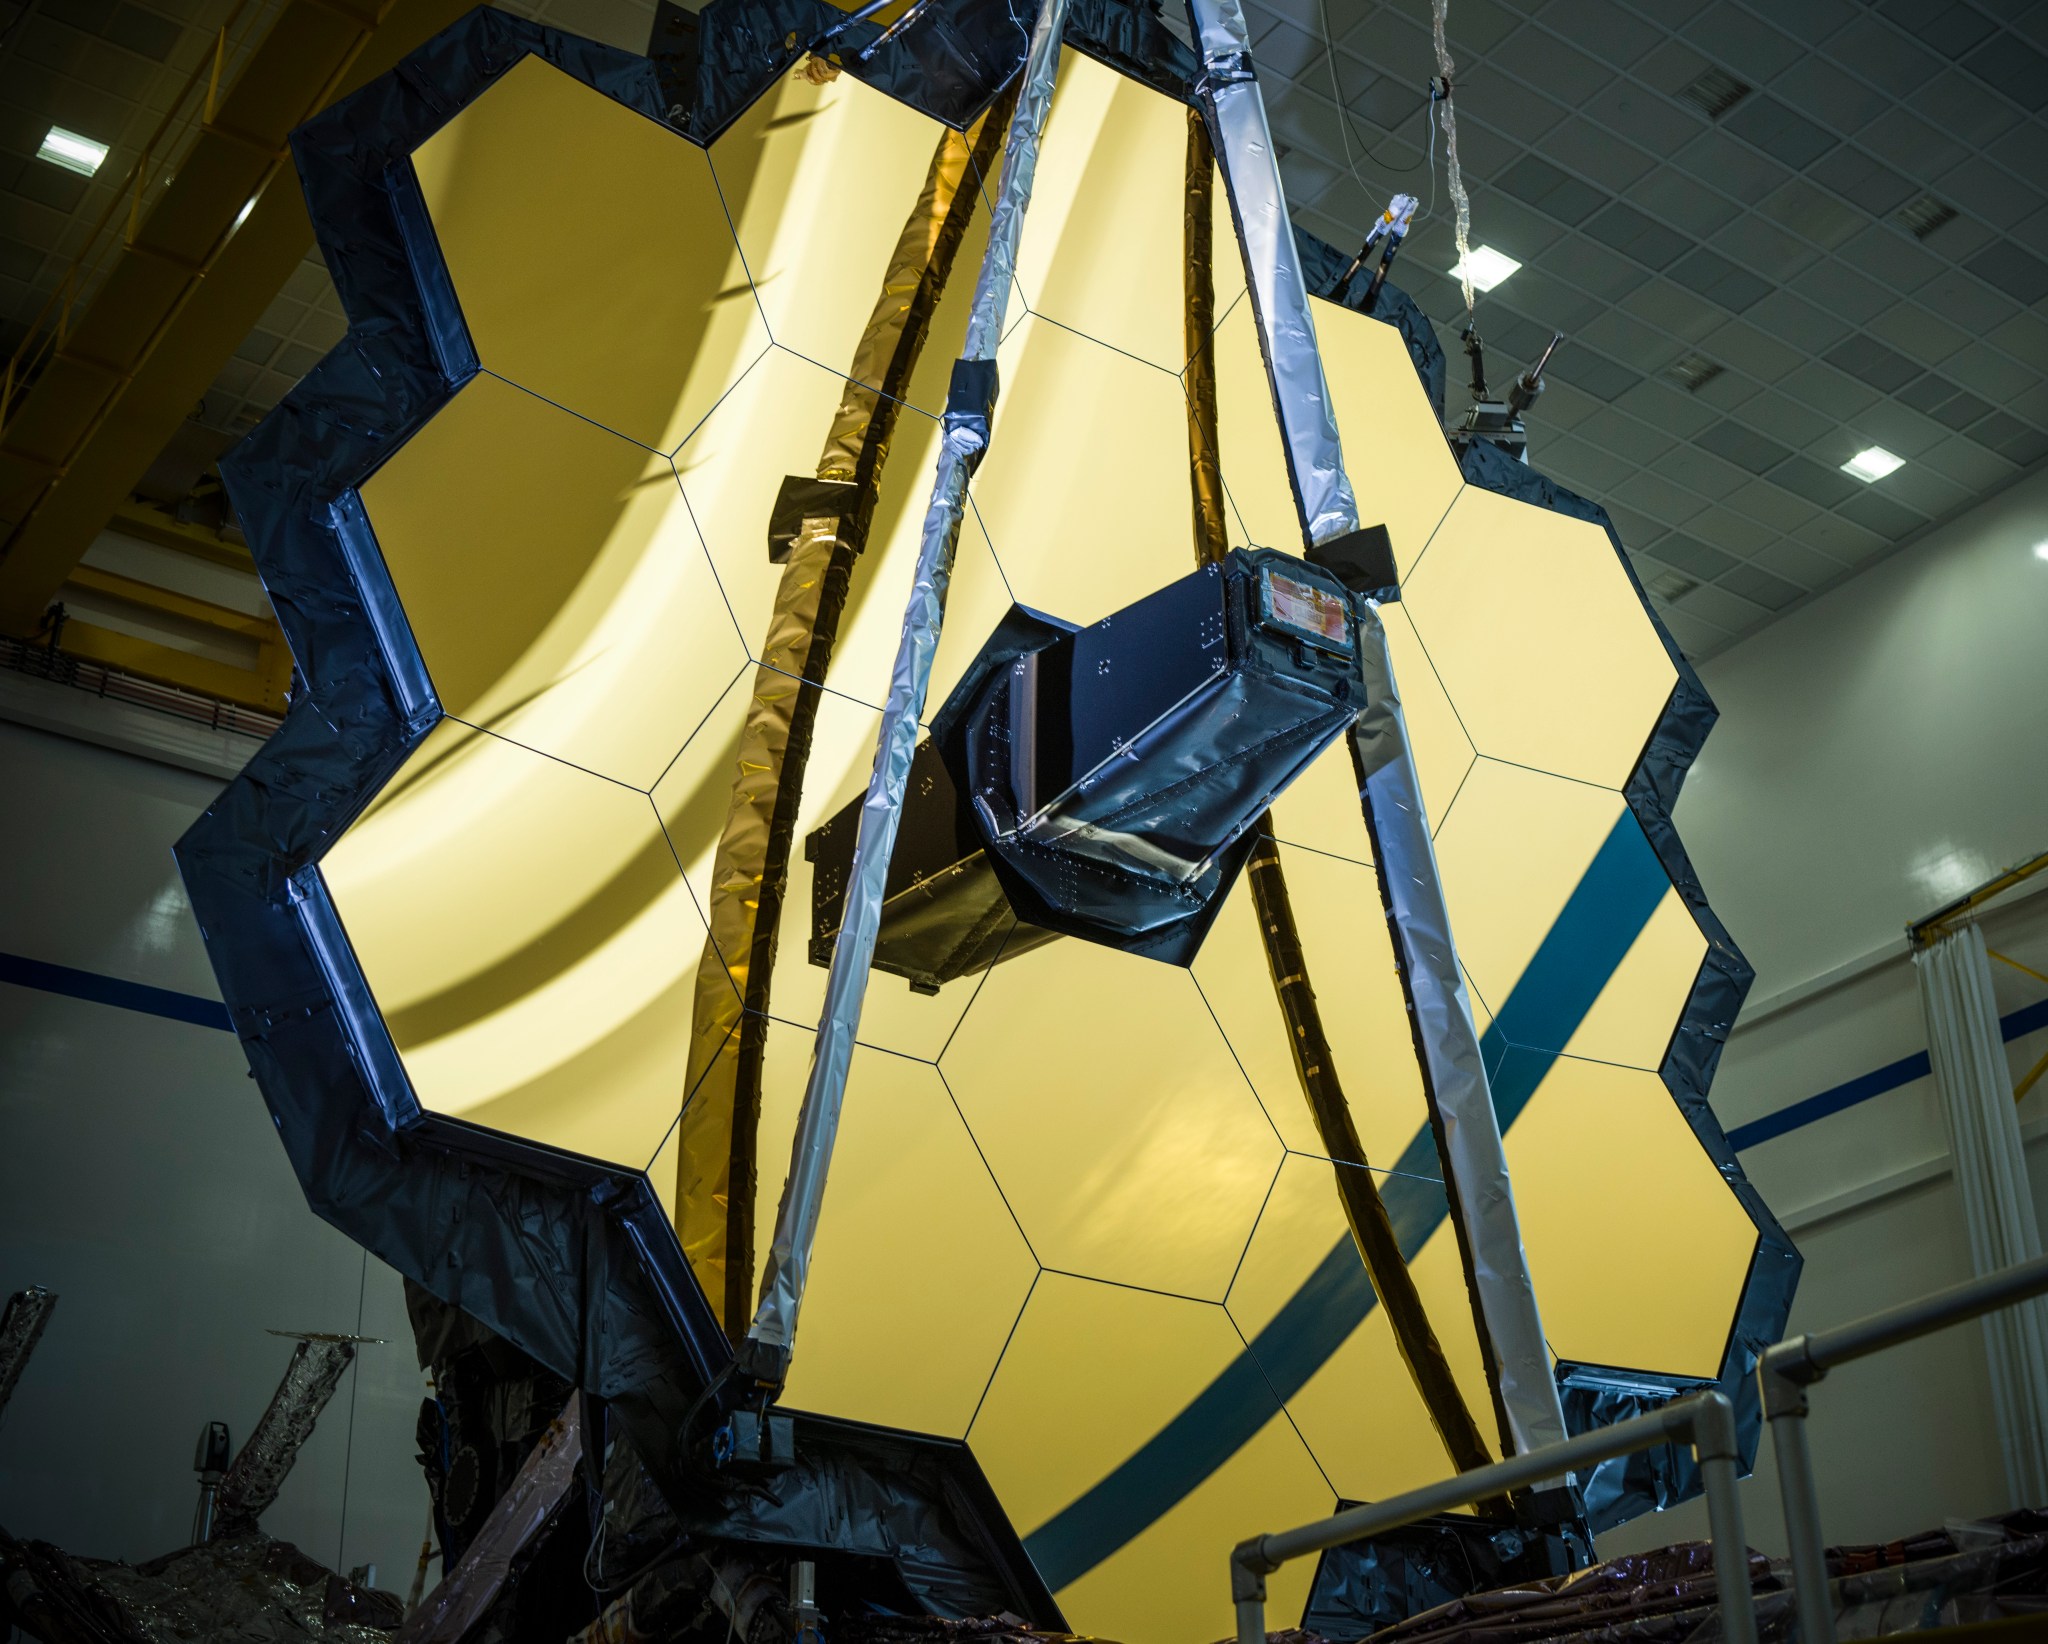 The Webb telescope primarily features a giant, golden hexagonal mirror made out of 18 segments. These segments surround a central black nosecone.